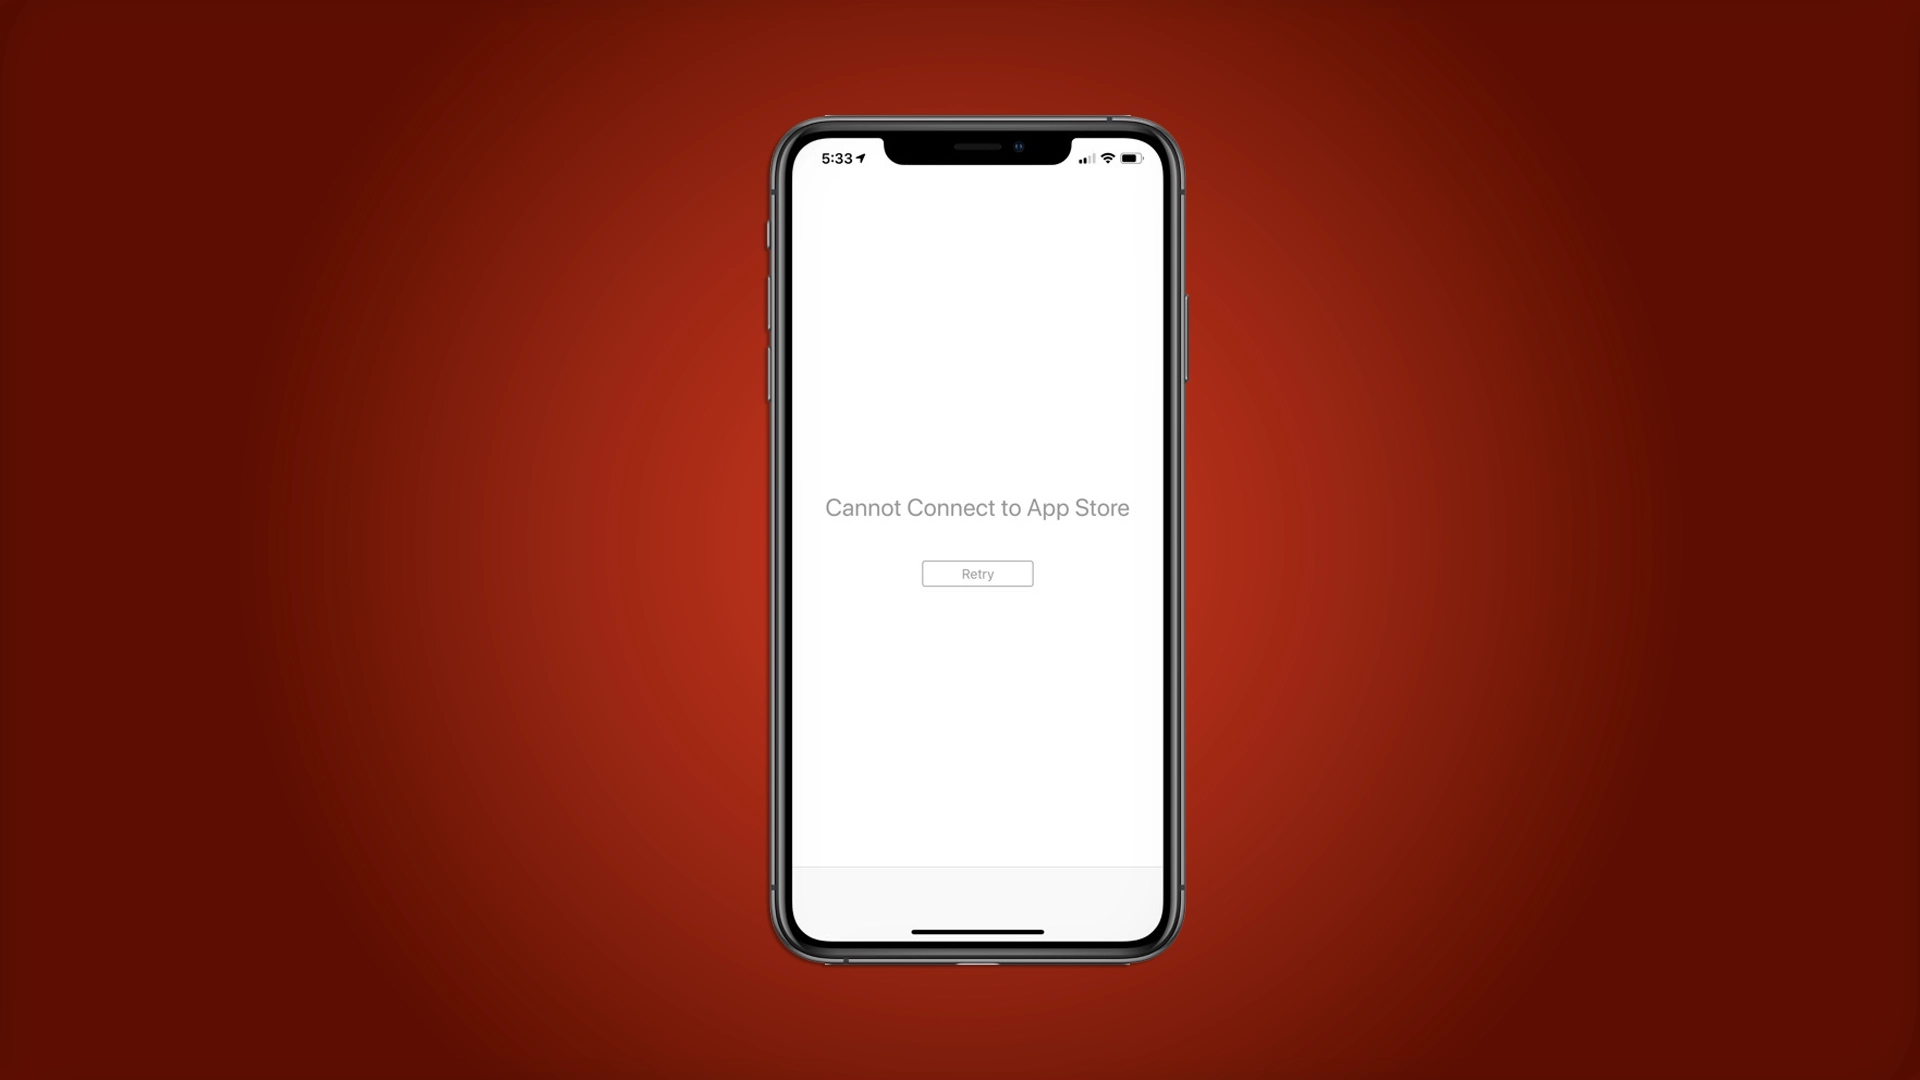 How to Fix Cannot Connect to App Store Error